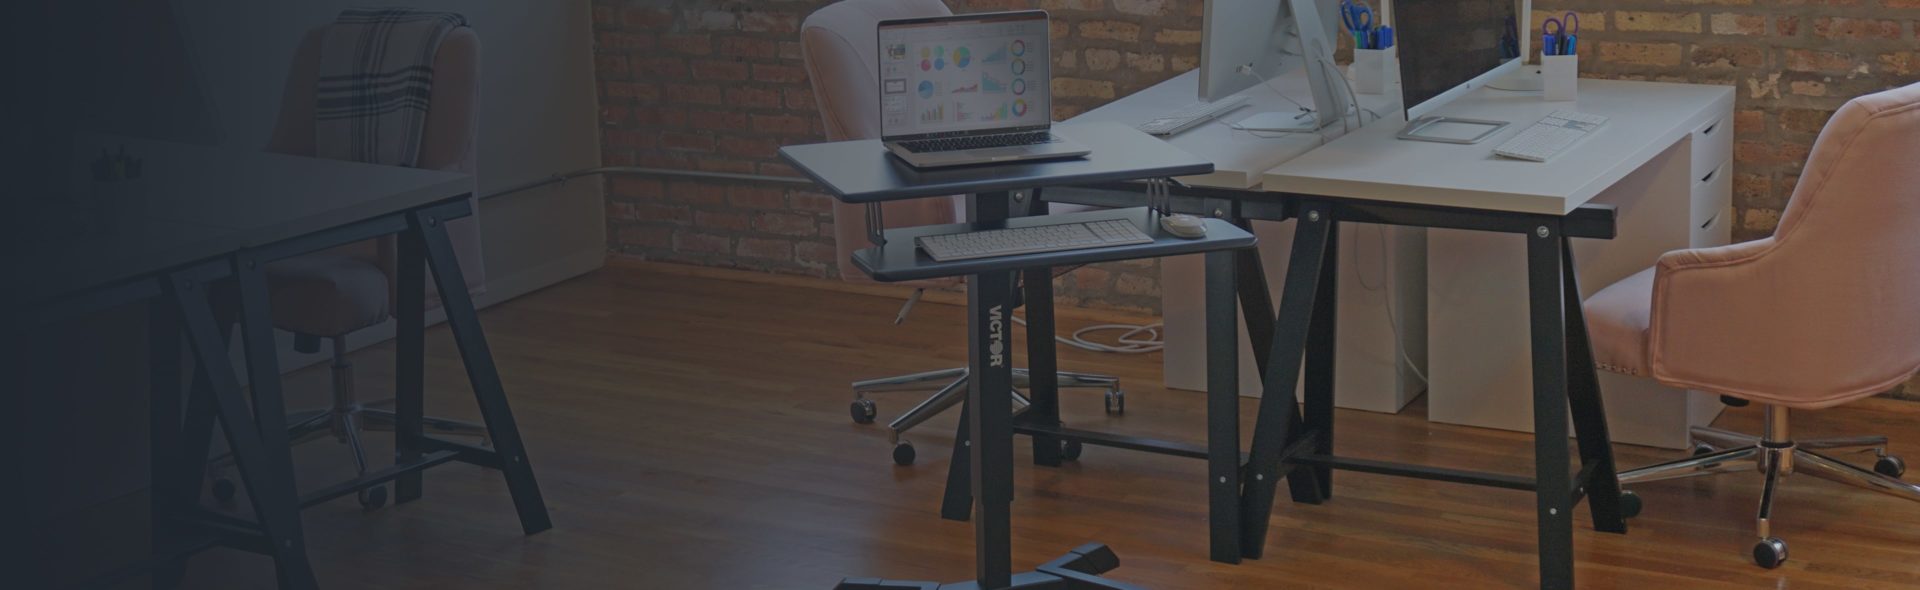 A mobile standing desk is shown in an office setting